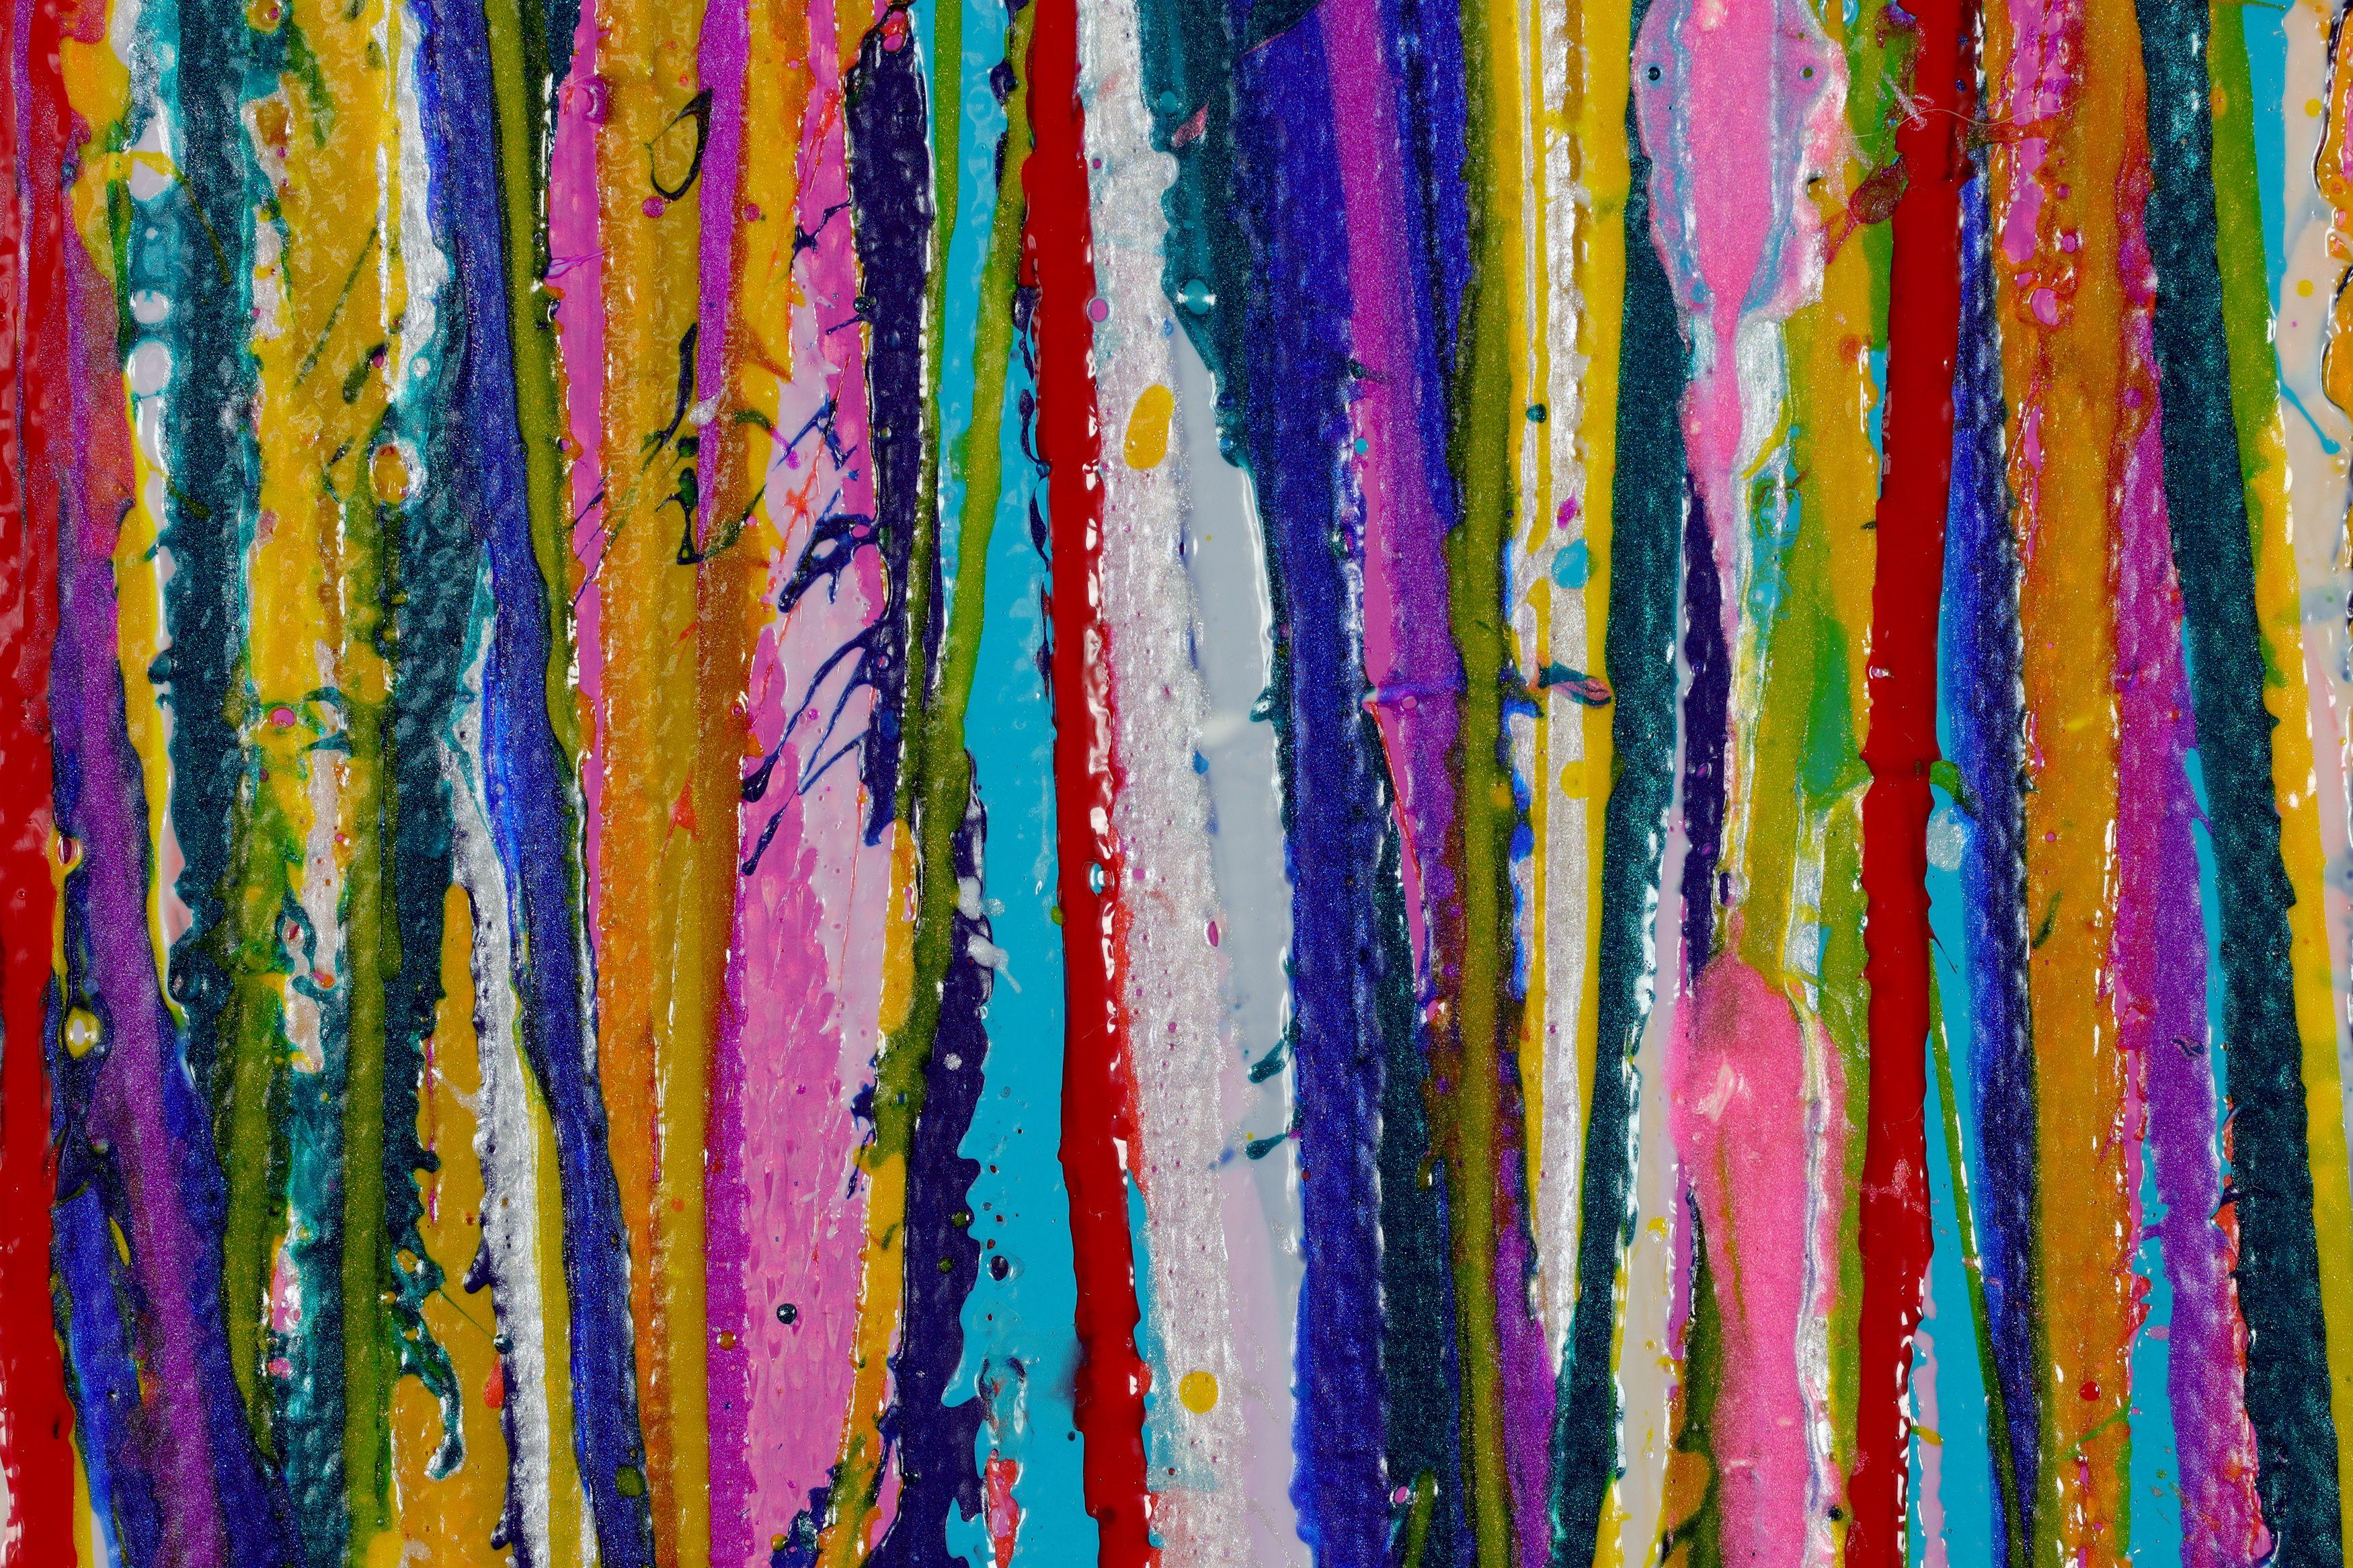 Vibrant expressionistic inspired by nature abstract indigo blue, shades of pink, yellow, orange with metallic pink drizzle. Ready to hang signed in front.    I include a certificate of authenticity that lists the materials as well as when the